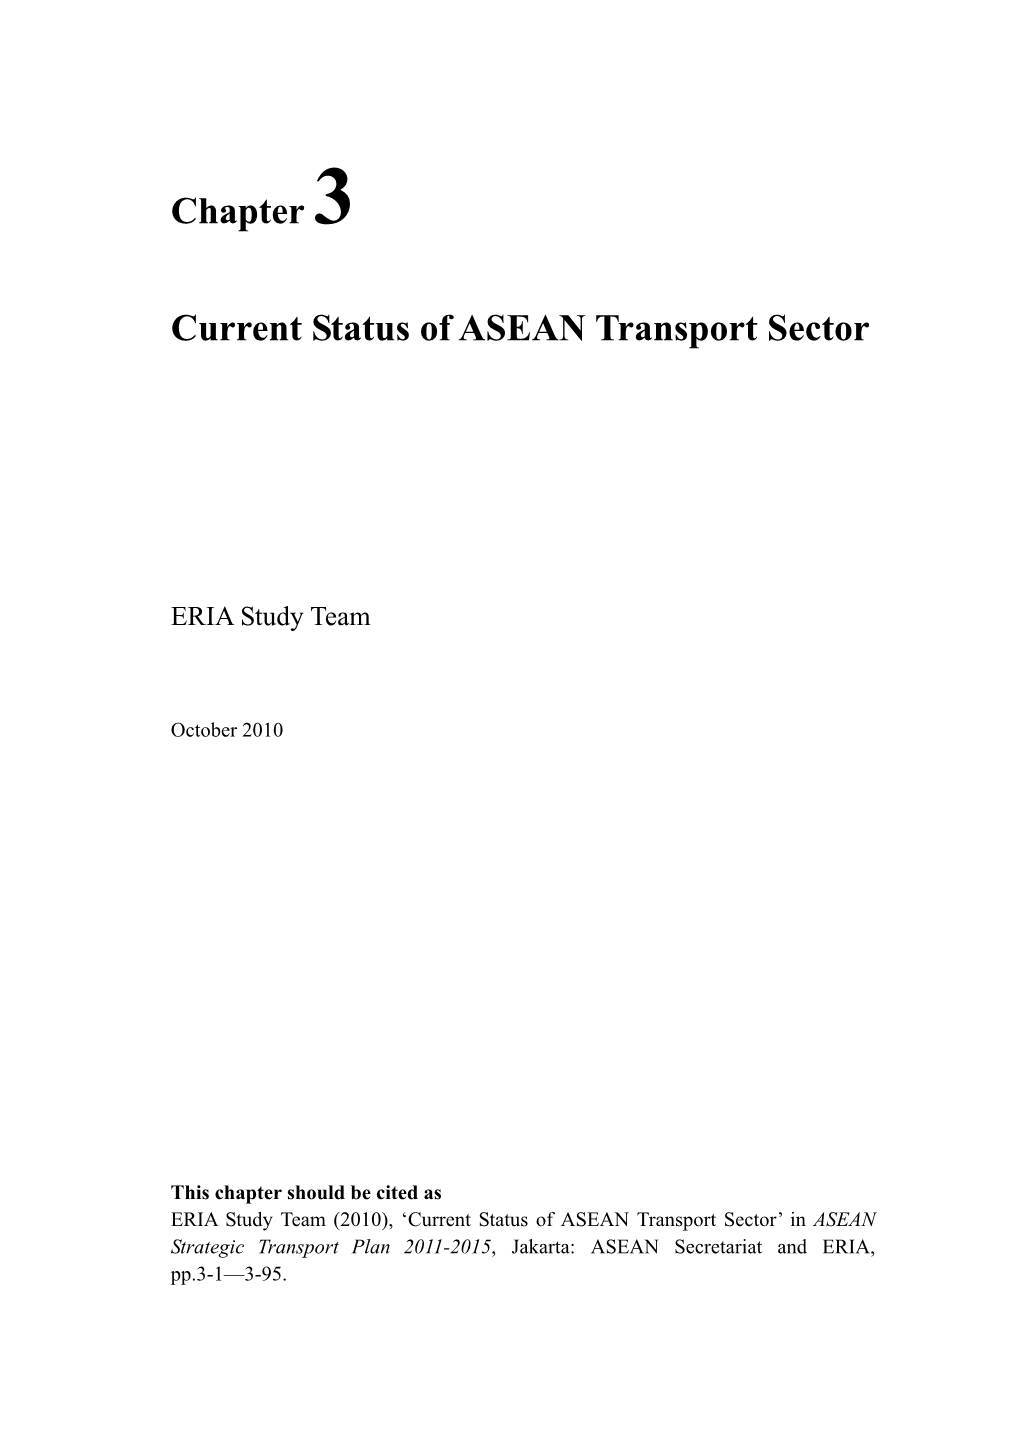 Chapter 3 Current Status of Asean Transport Sector